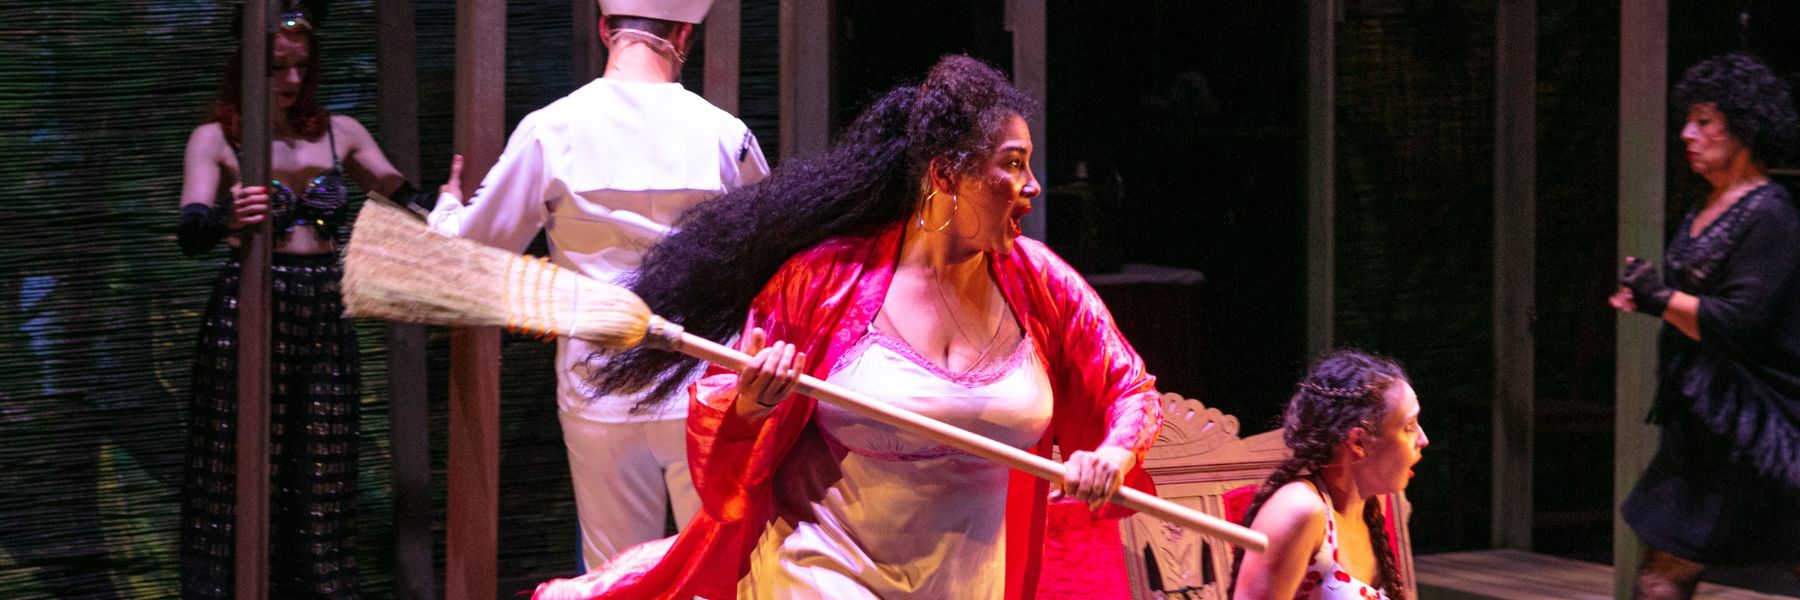 The Tennessee Williams Festival puts on a production of The Rose Tattoo.